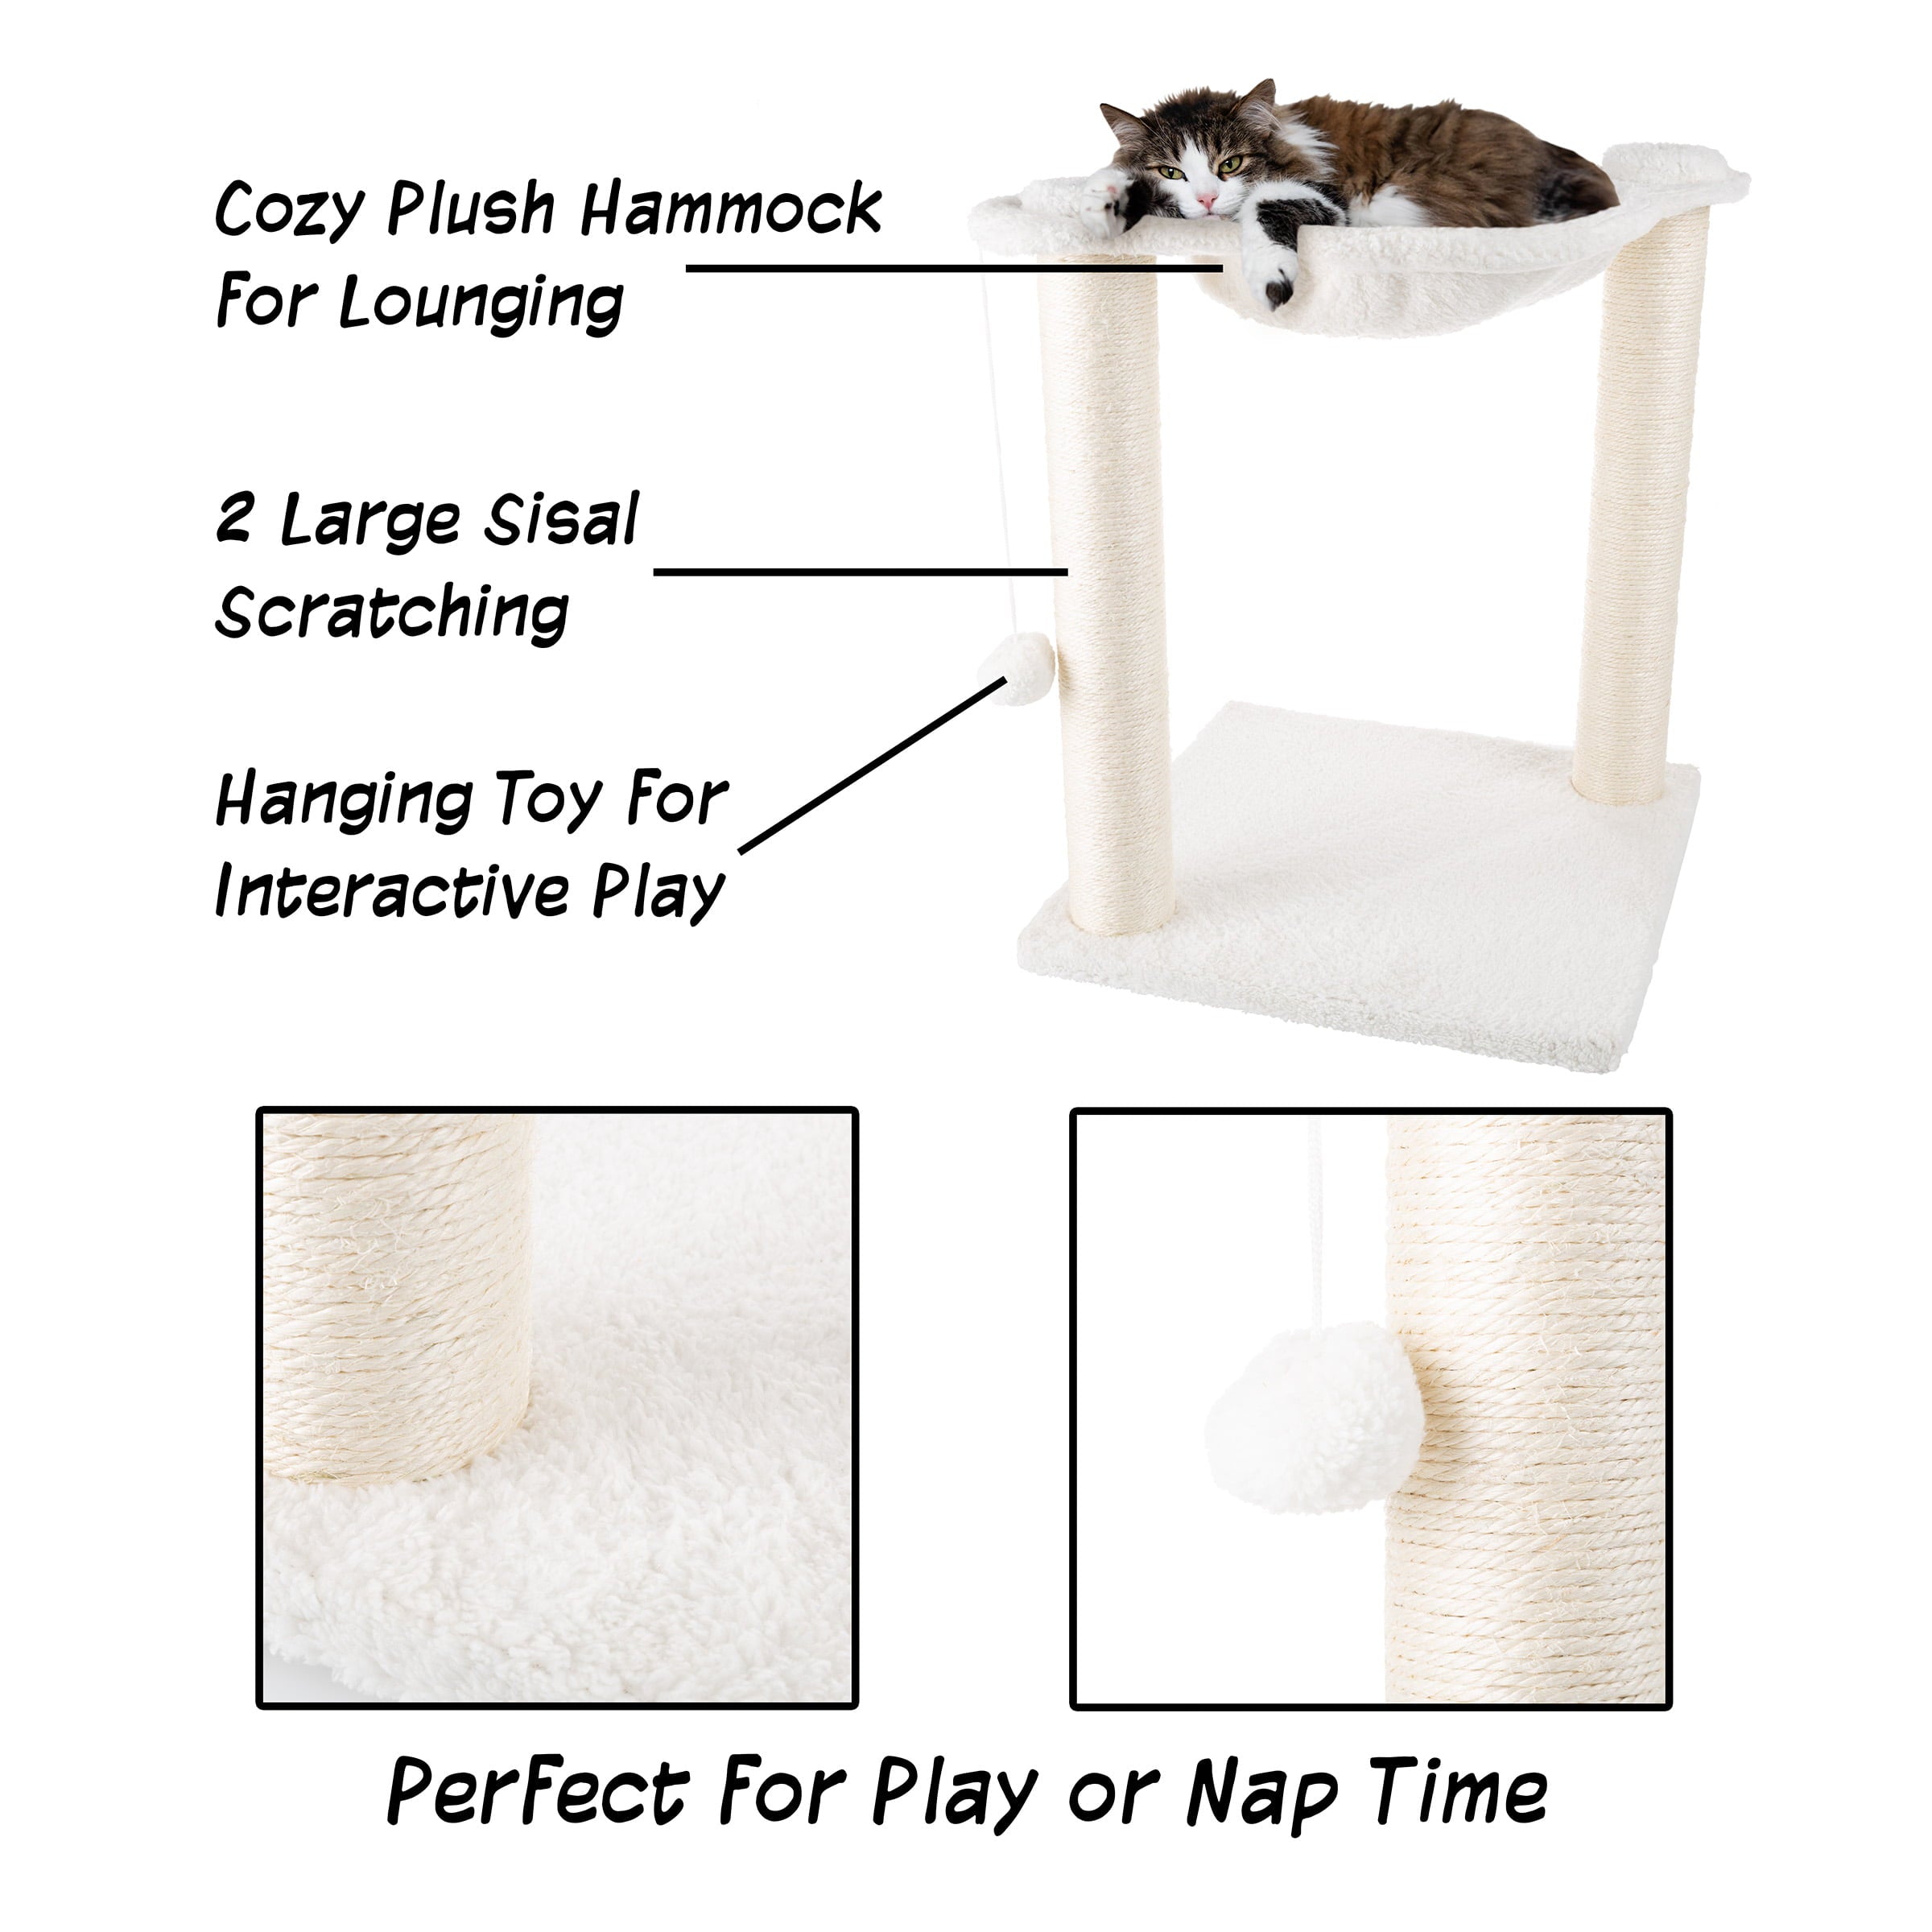 19-Inch Cat Scratching Post with Hammock – Sisal Fabric and Carpet Small Cat Tree， Hanging Ball Toy for Adult Cats and Kittens by PETMAKER (White)